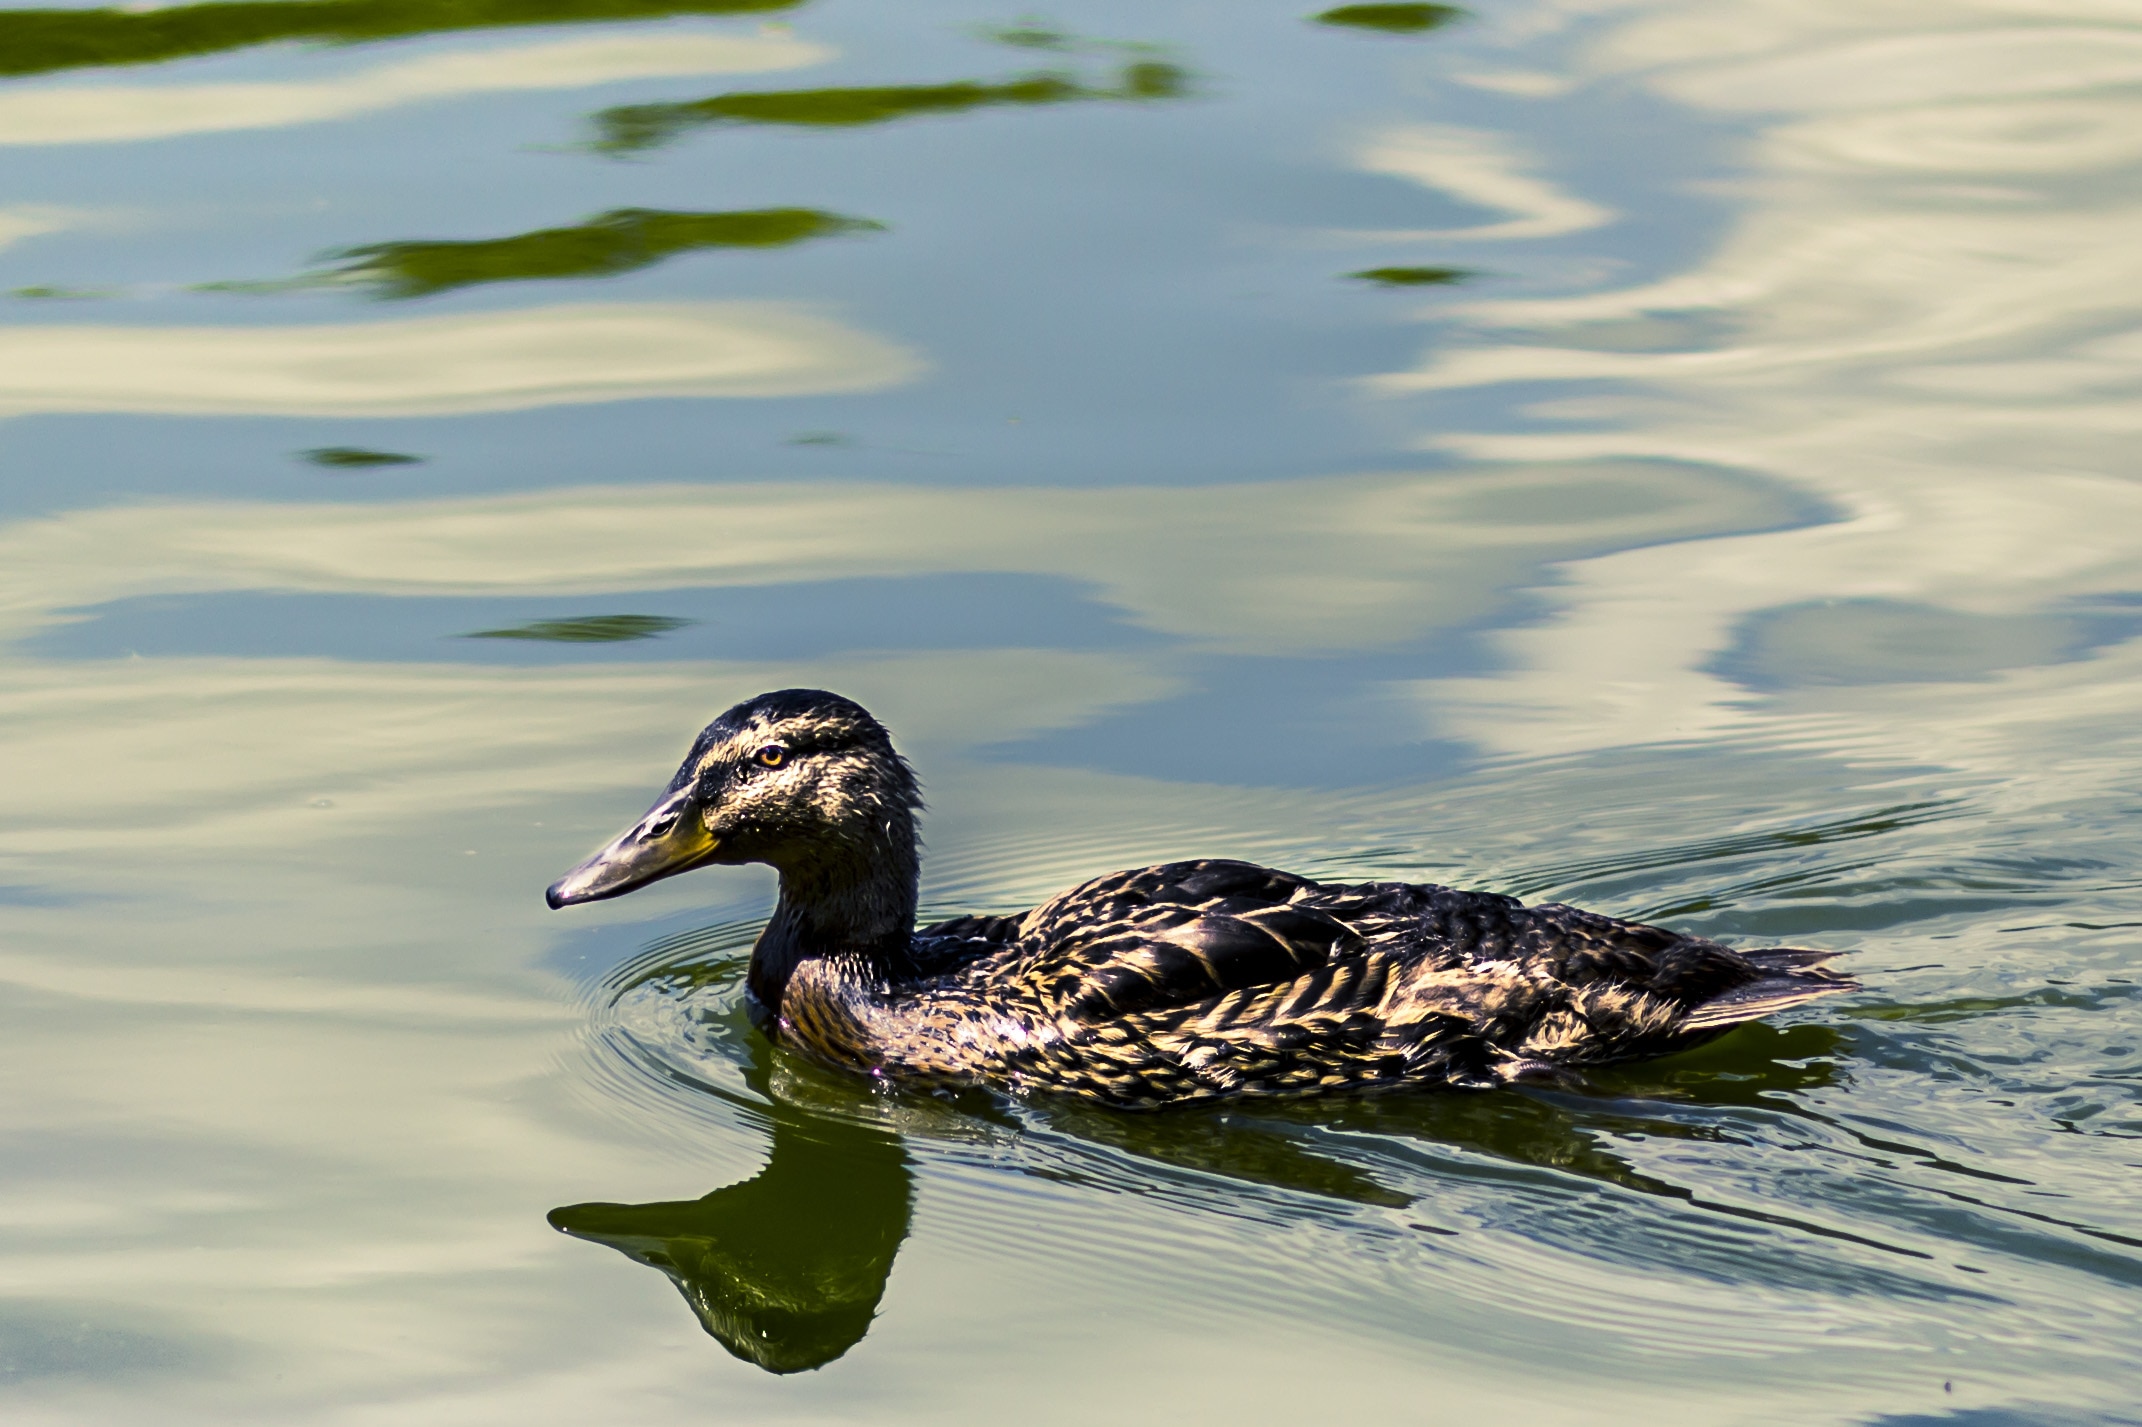 brown and black duck swimming on body of water